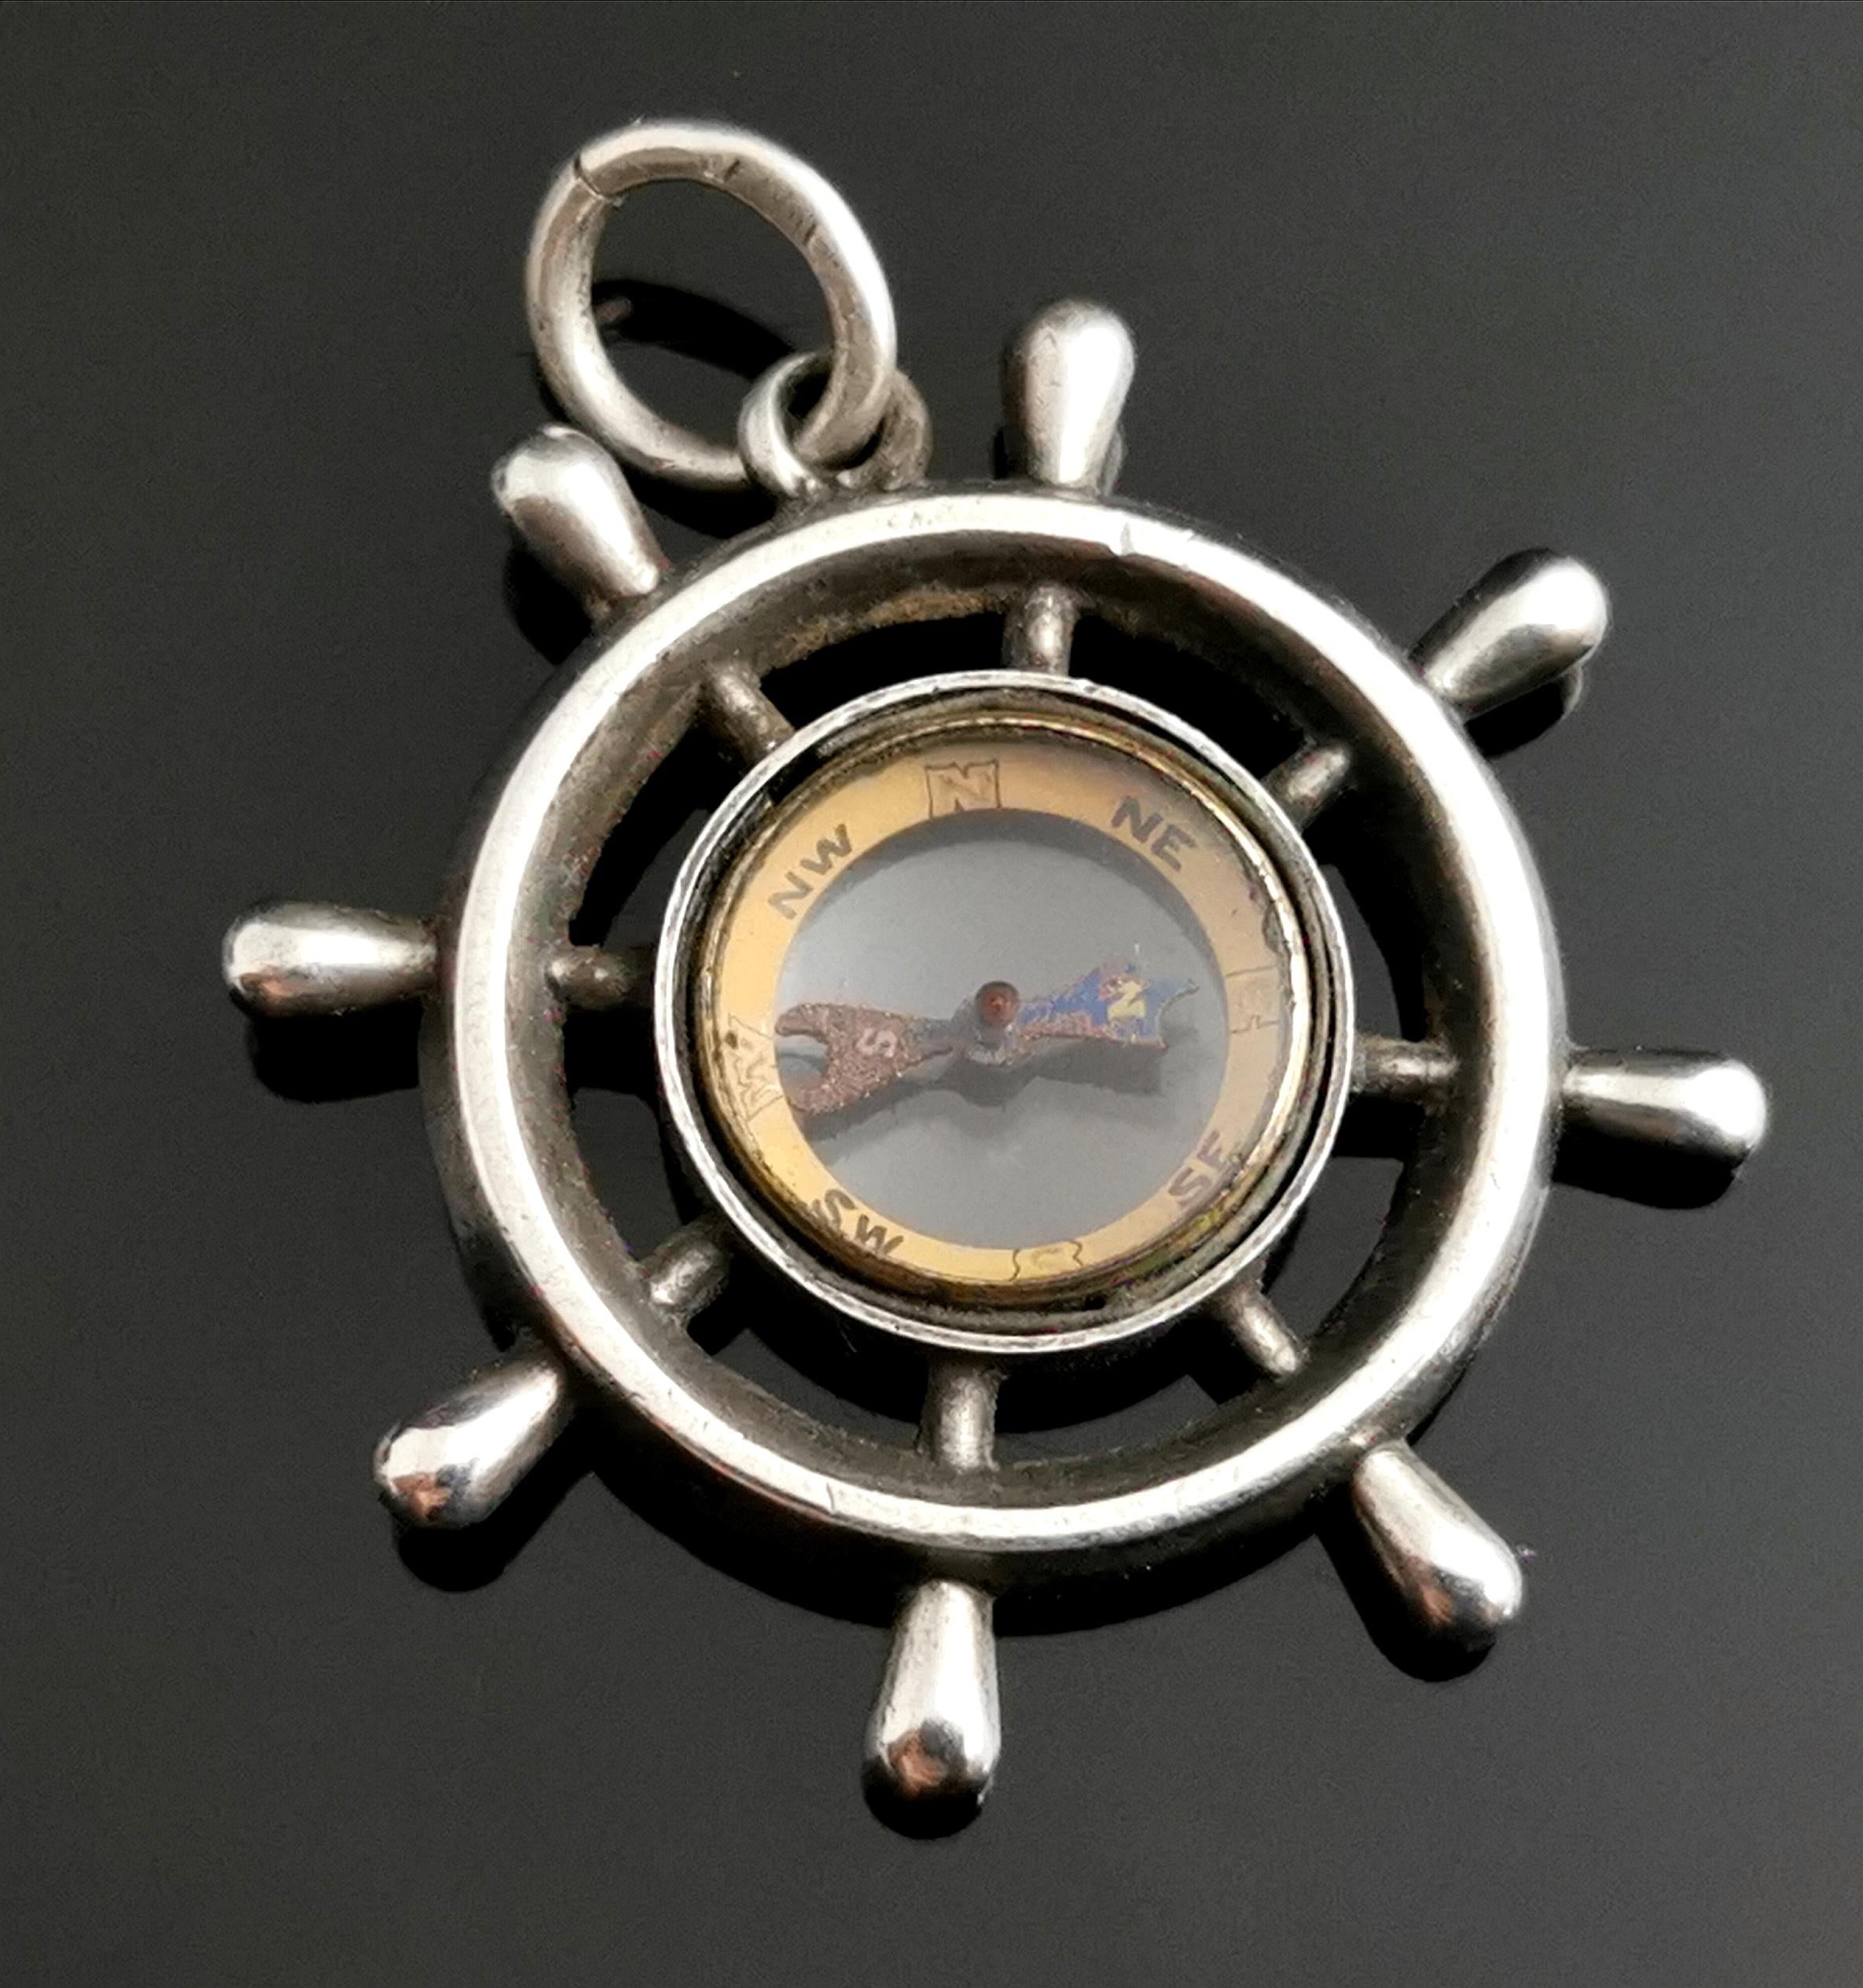 A fantastic antique, Victorian compass fob pendant designed as a ships wheel.

This is a nice sized piece, crafted in sterling silver, well designed as a ships wheel with a central working compass.

The compass is finished in gilt.

This would make